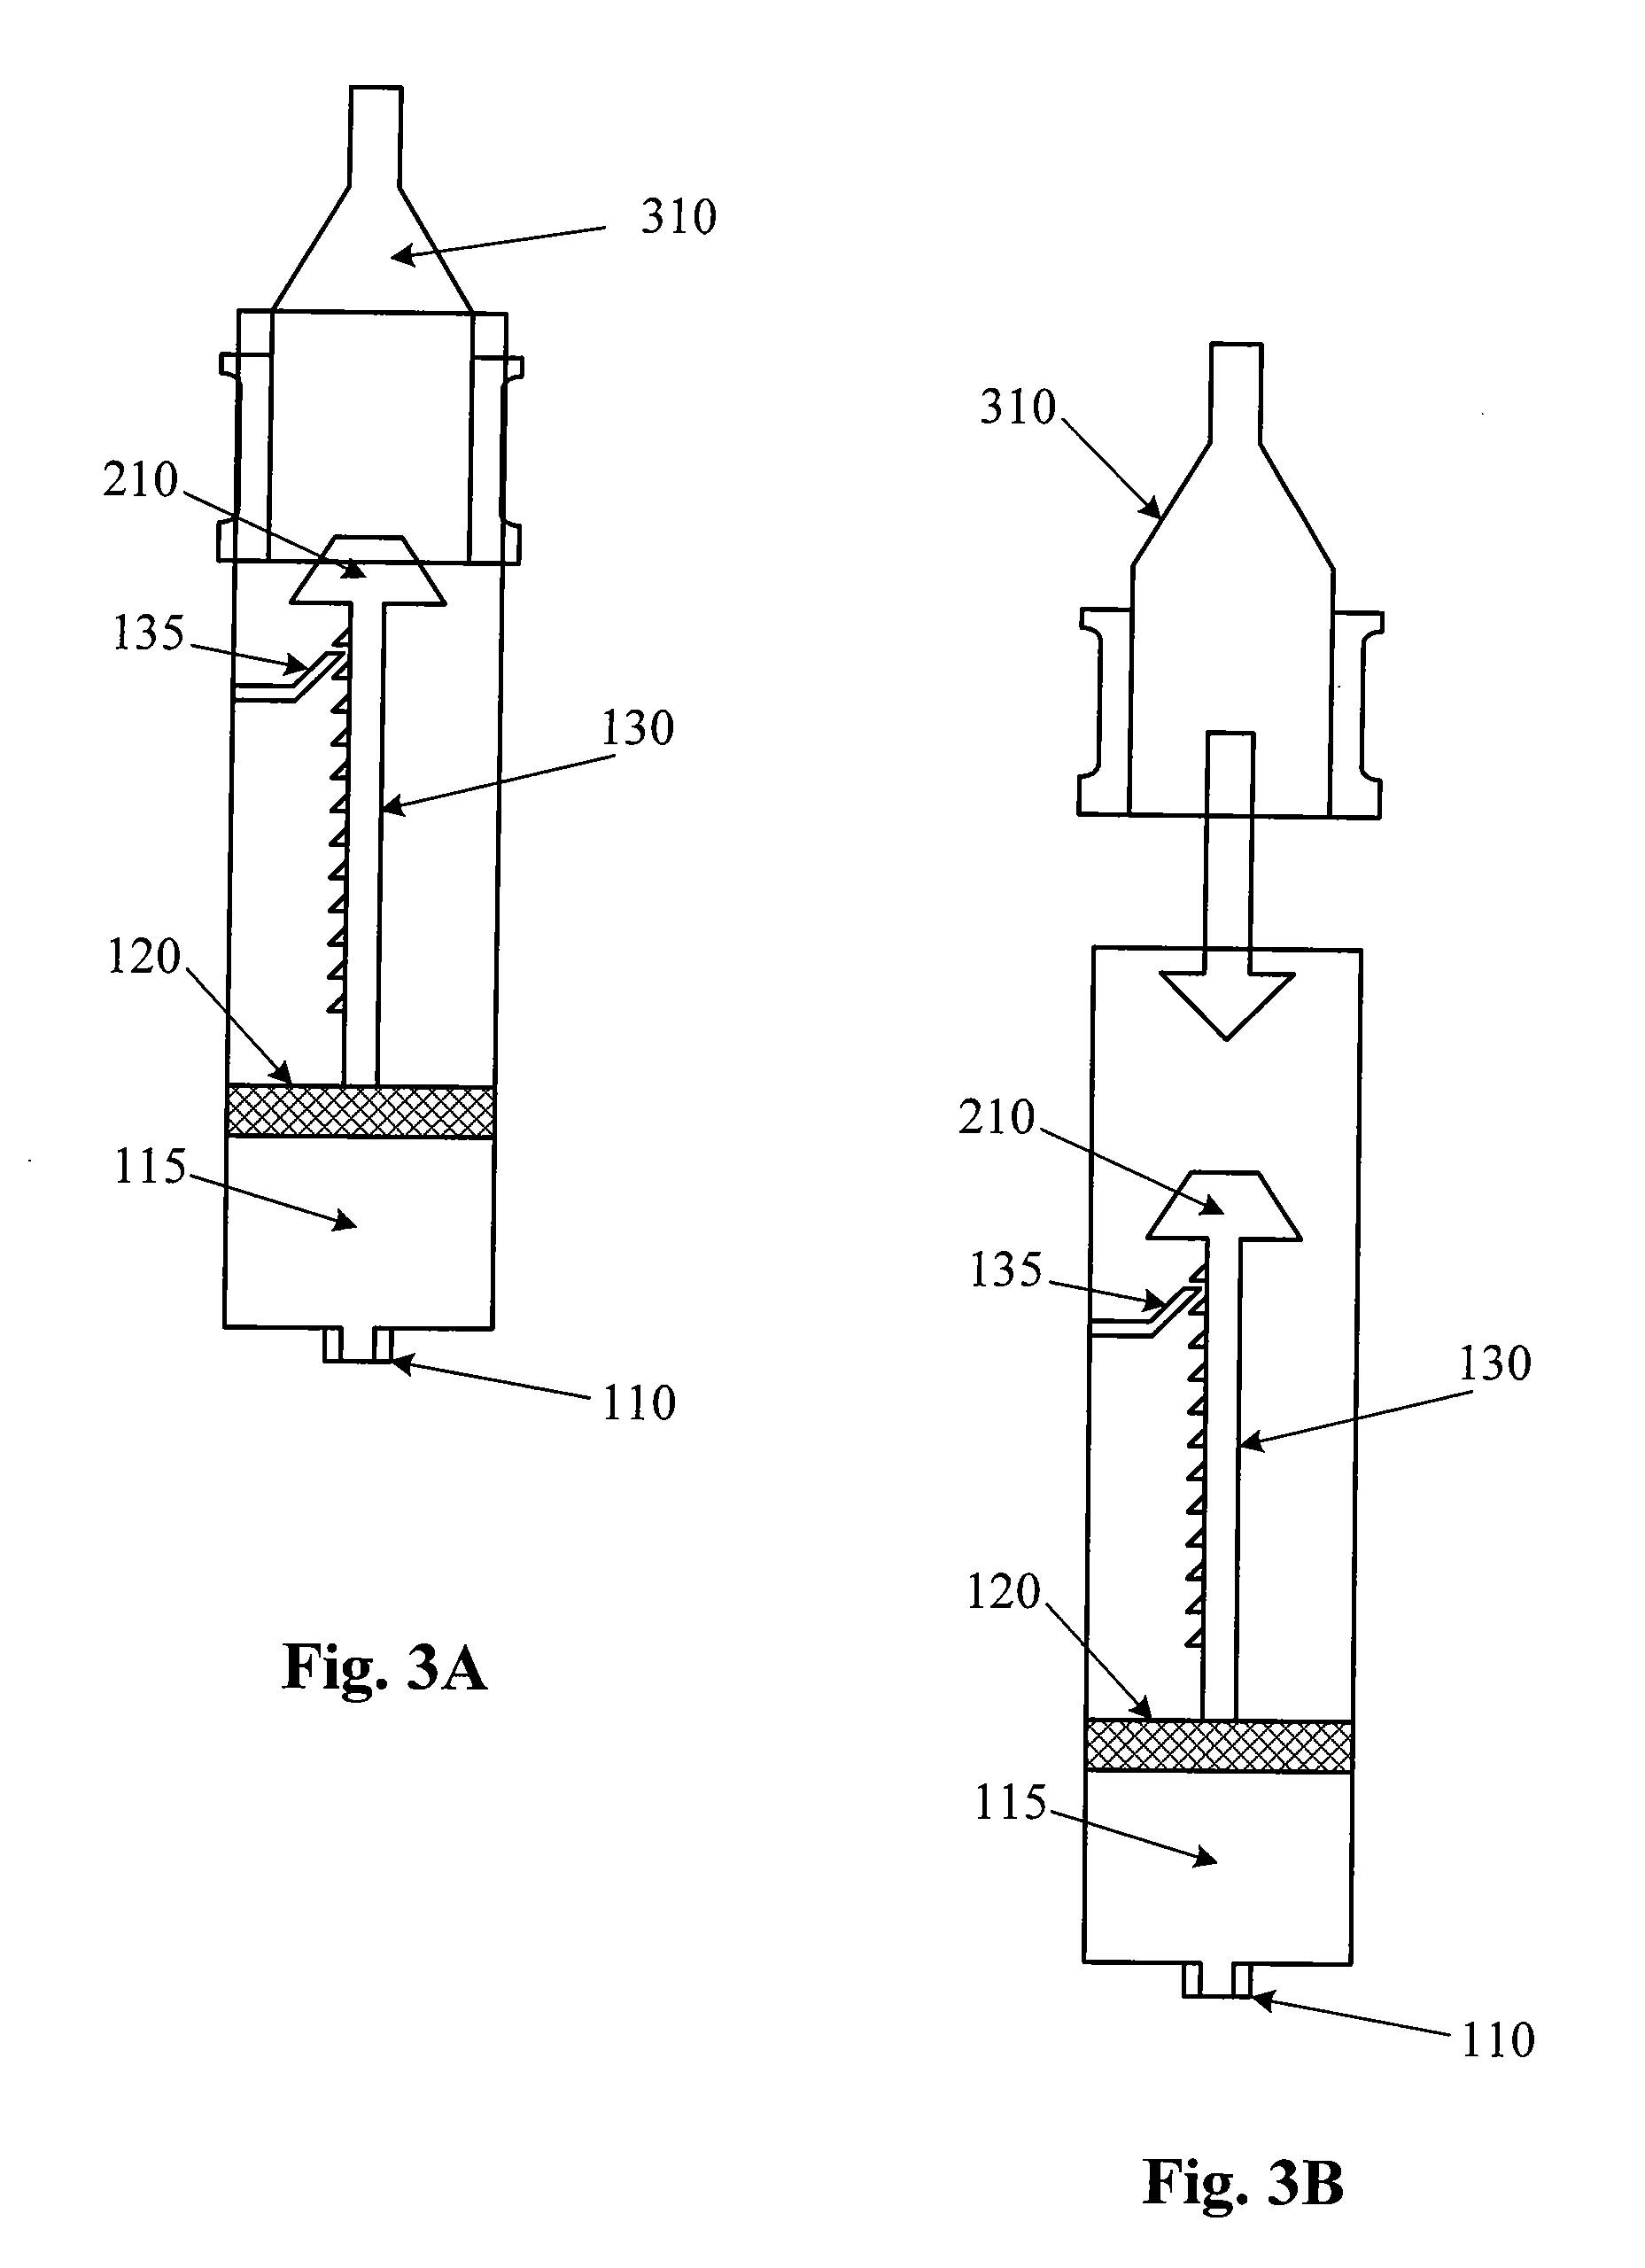 Pneumatically-Powered Intraocular Lens Injection Device with Removable Cartridge